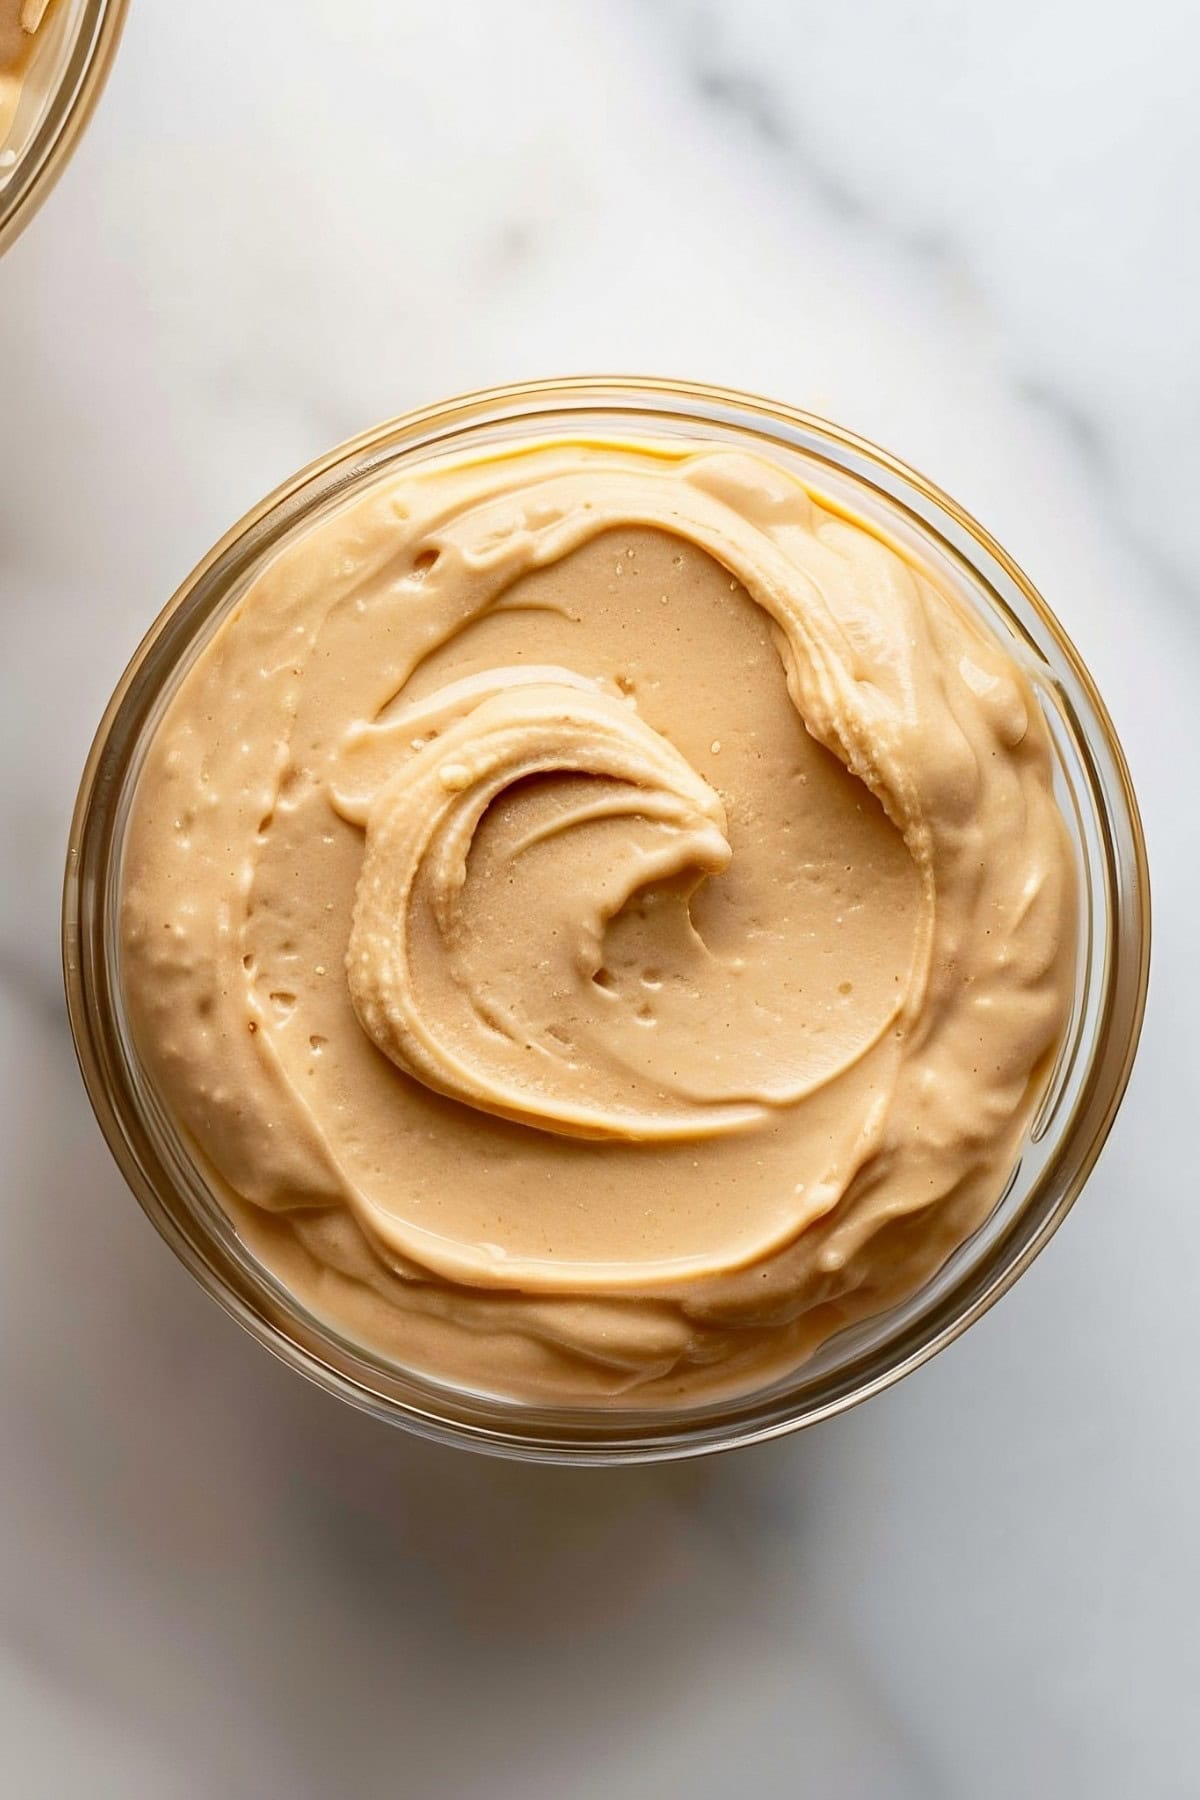 Smooth and creamy peanut butter mousse, overhead view